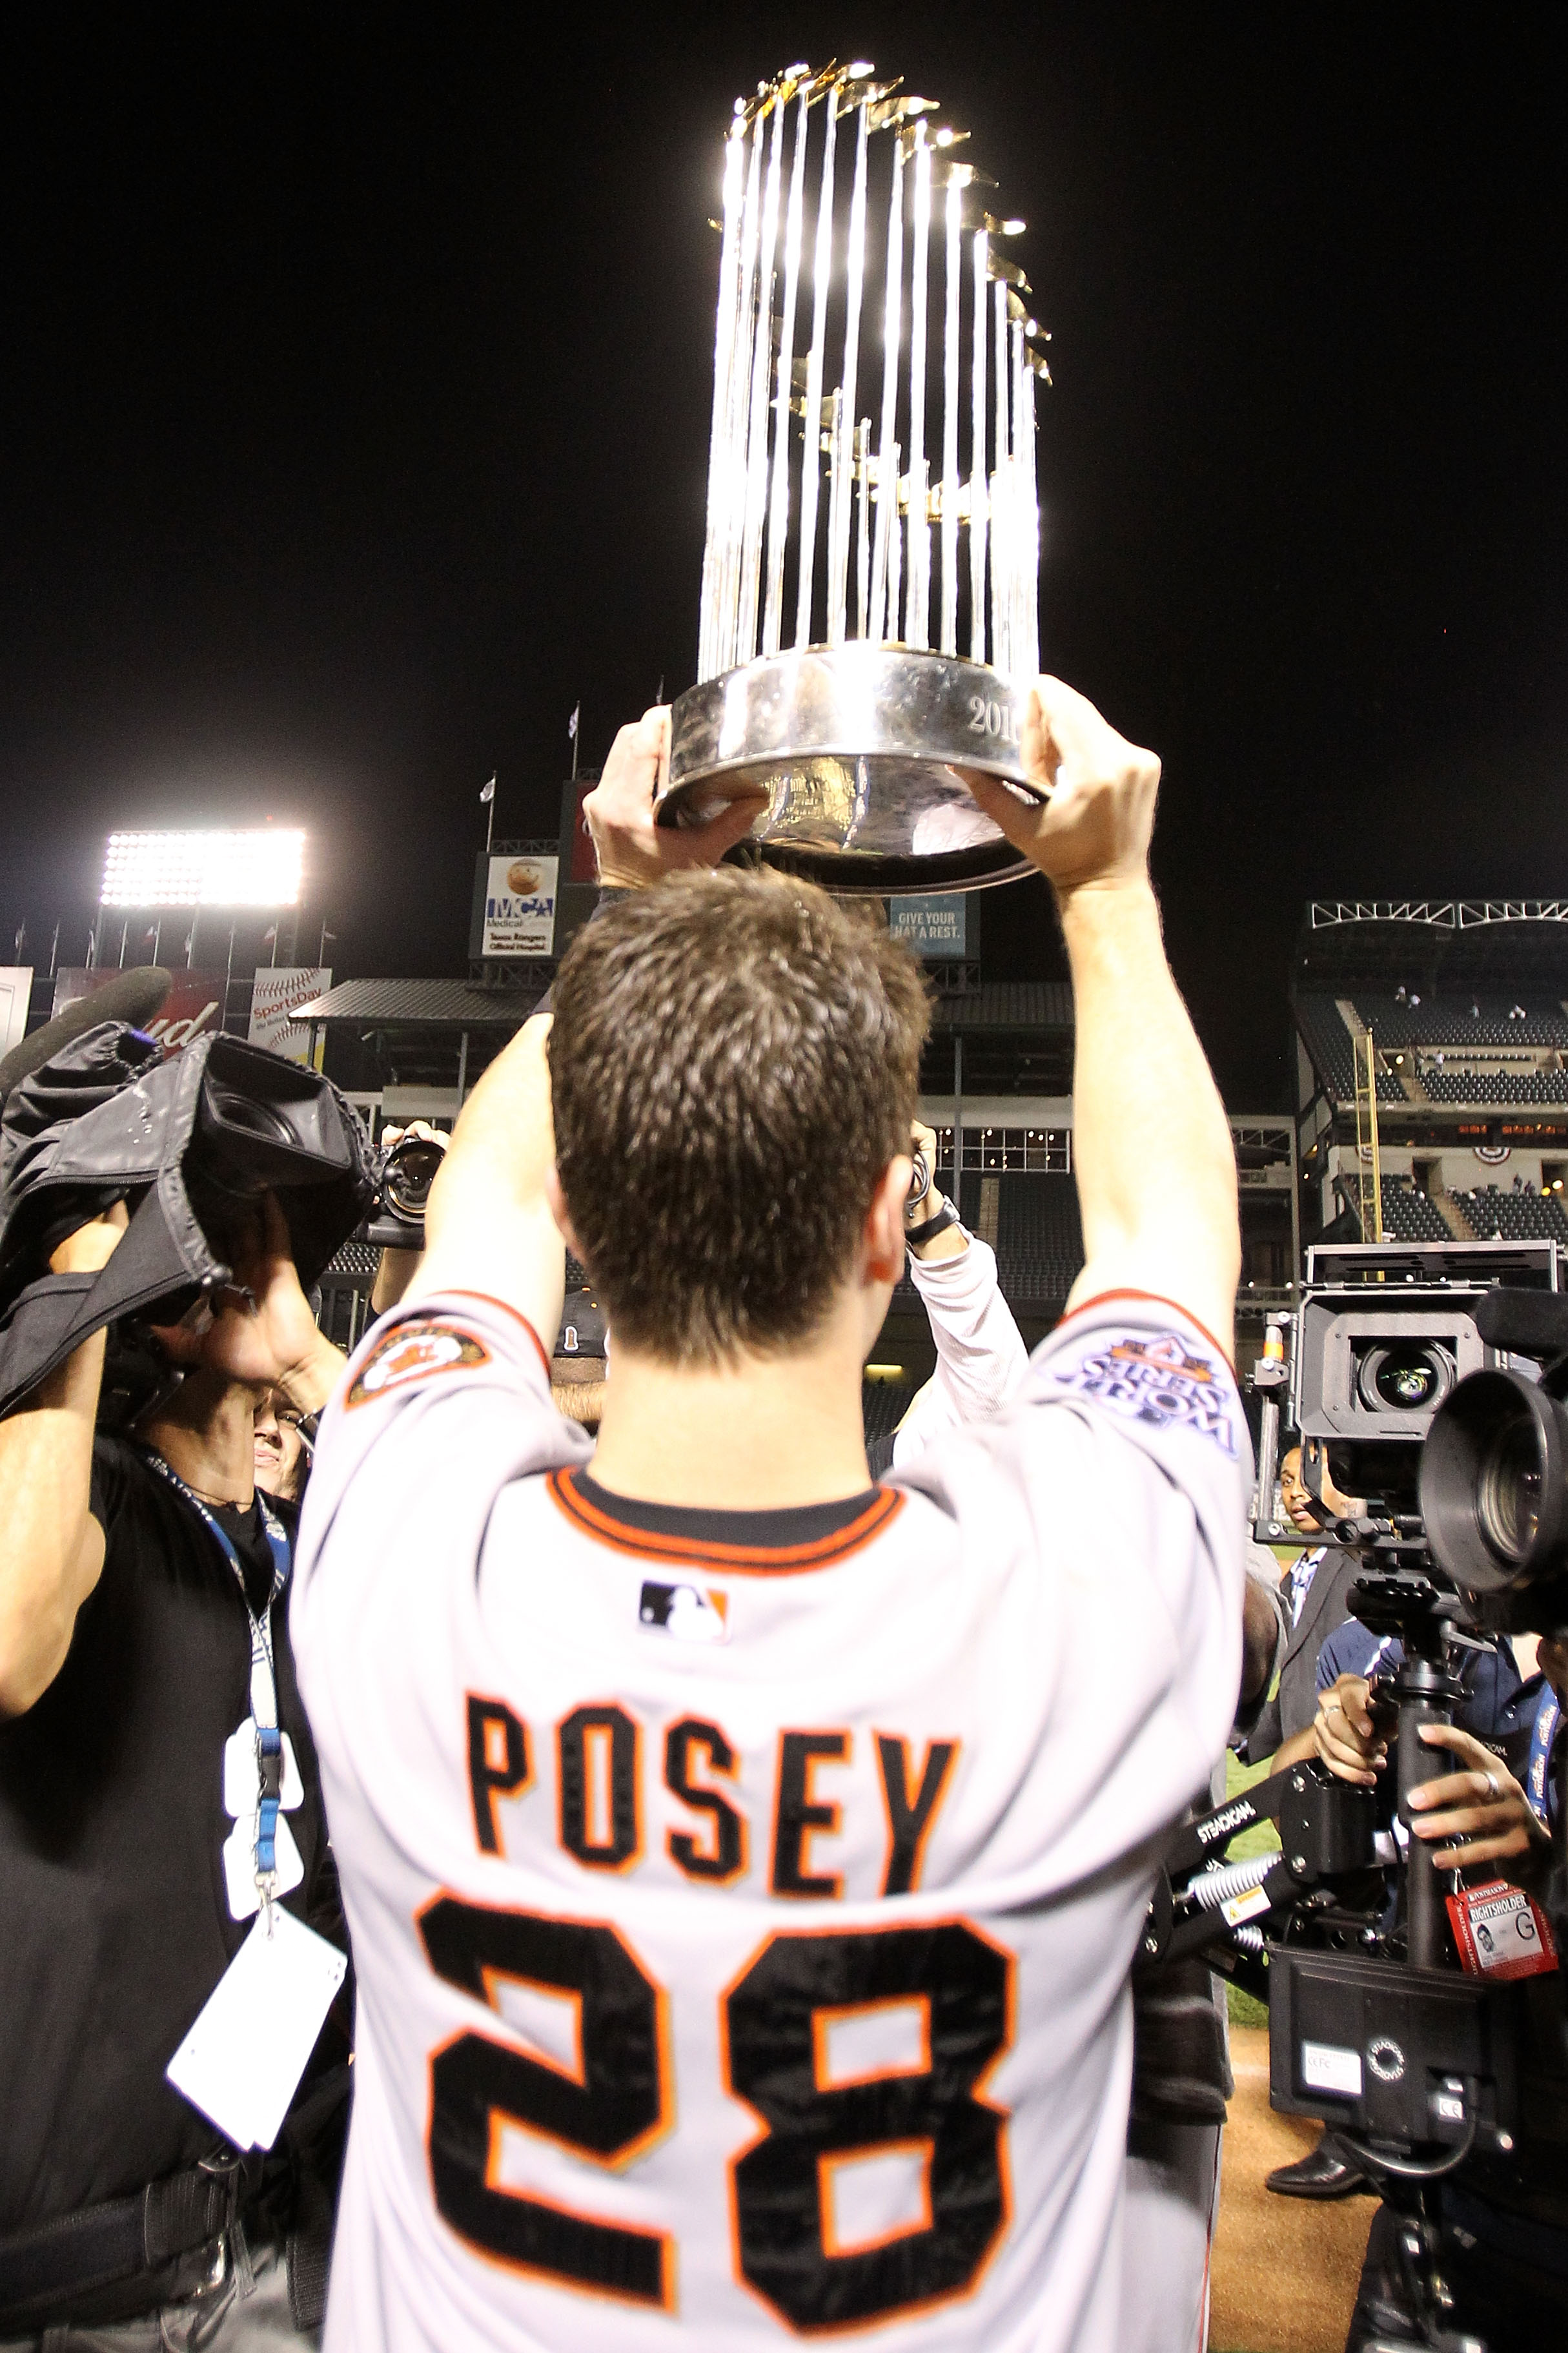 File:Buster Posey 2012 World Series Victory Parade.jpg - Wikipedia